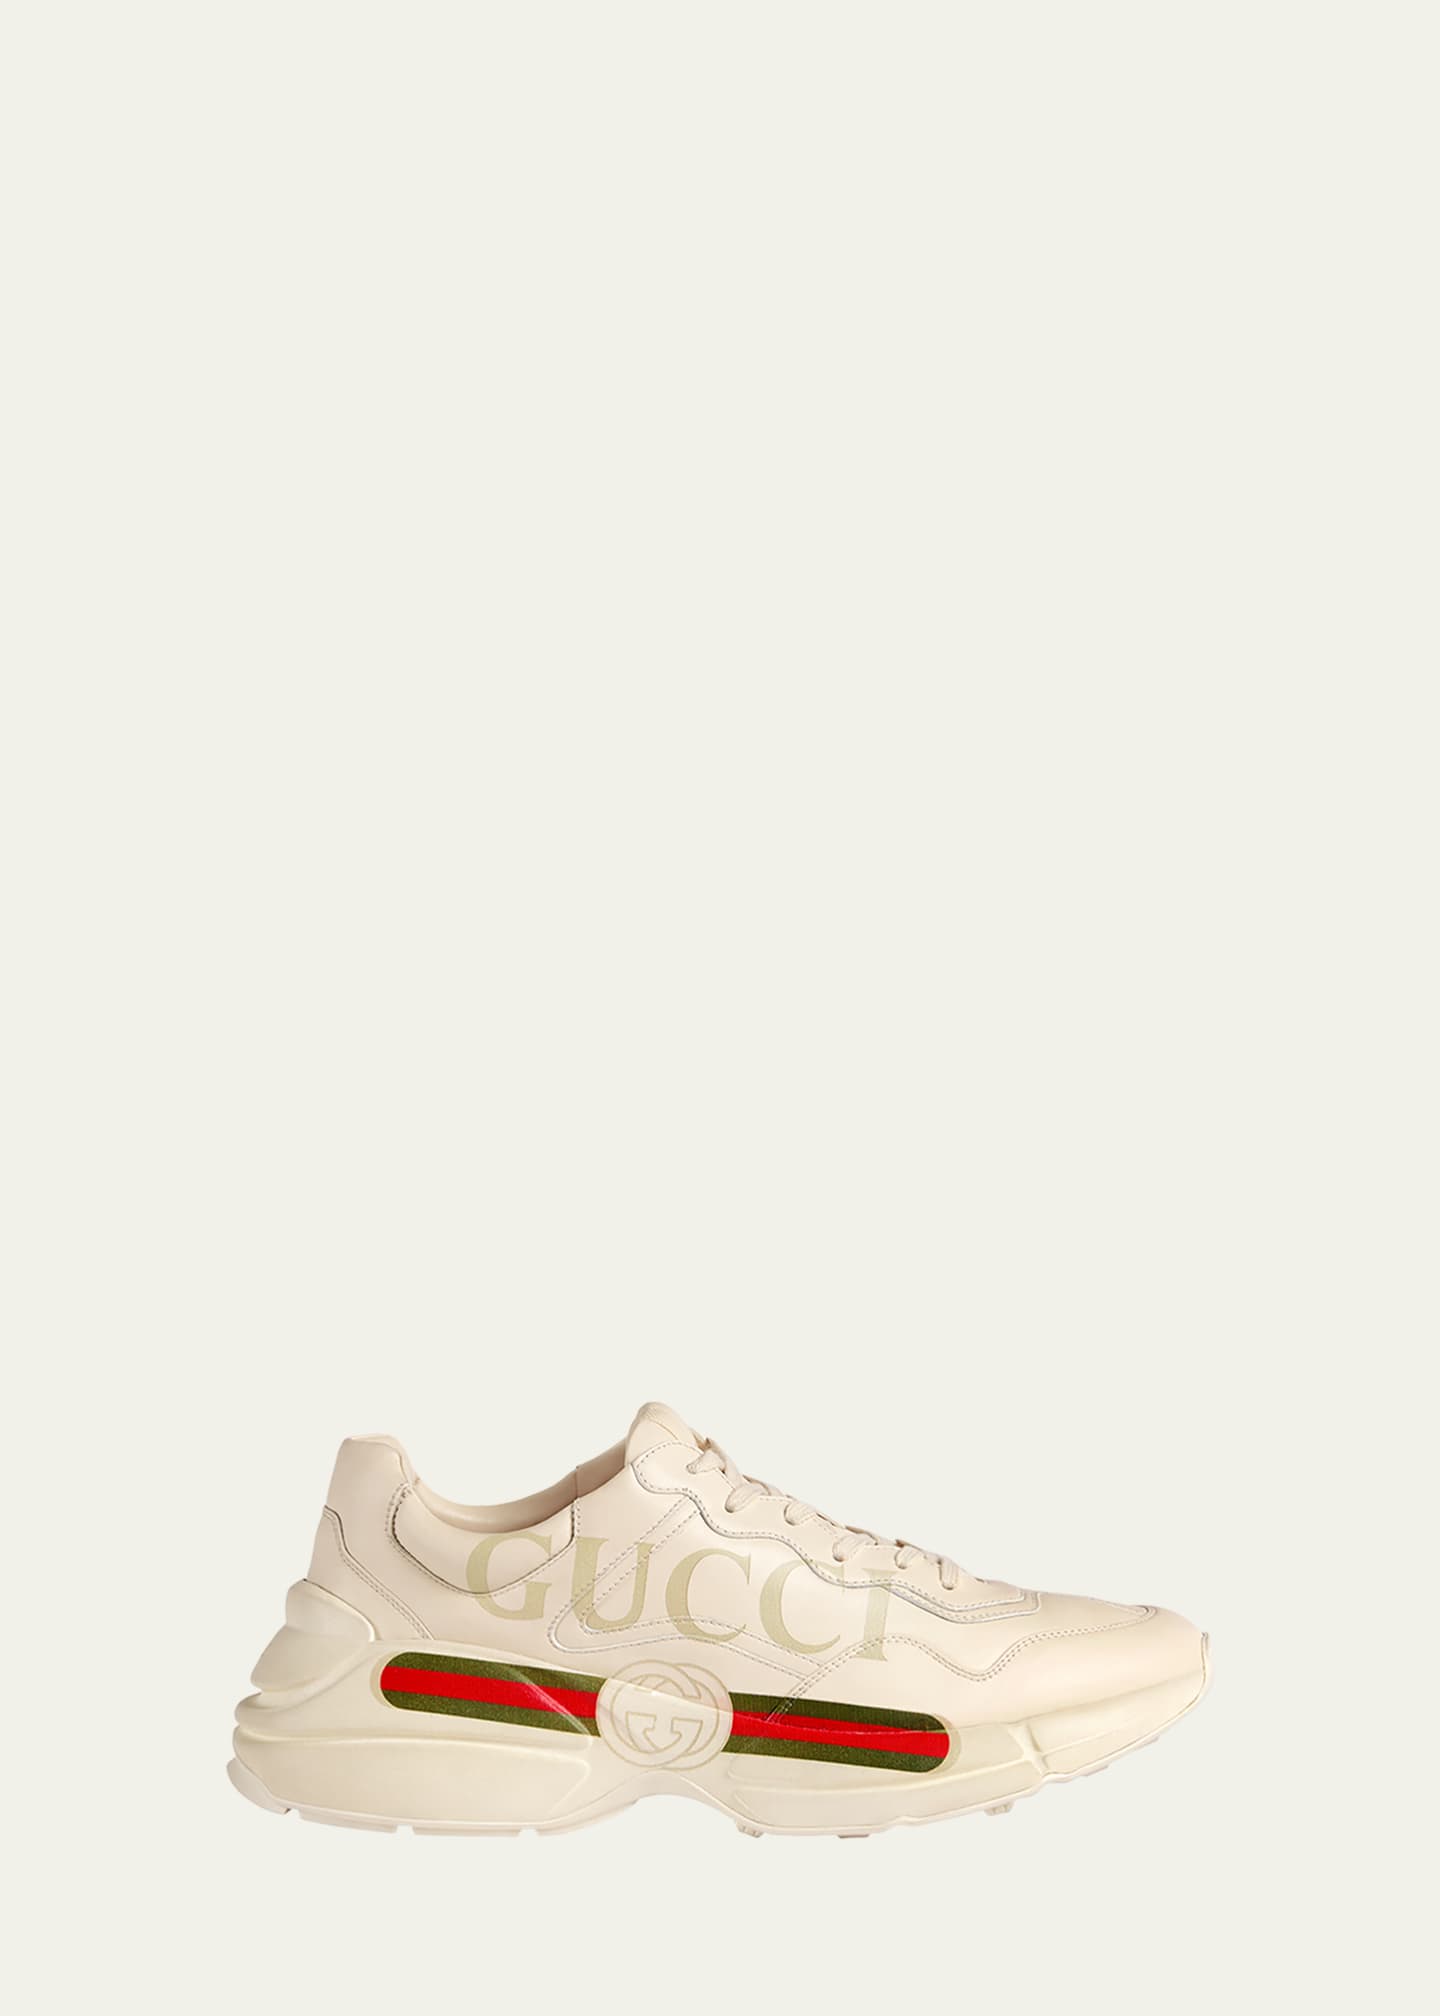 Gucci Men's Rhyton Logo Leather Sneakers Image 1 of 2